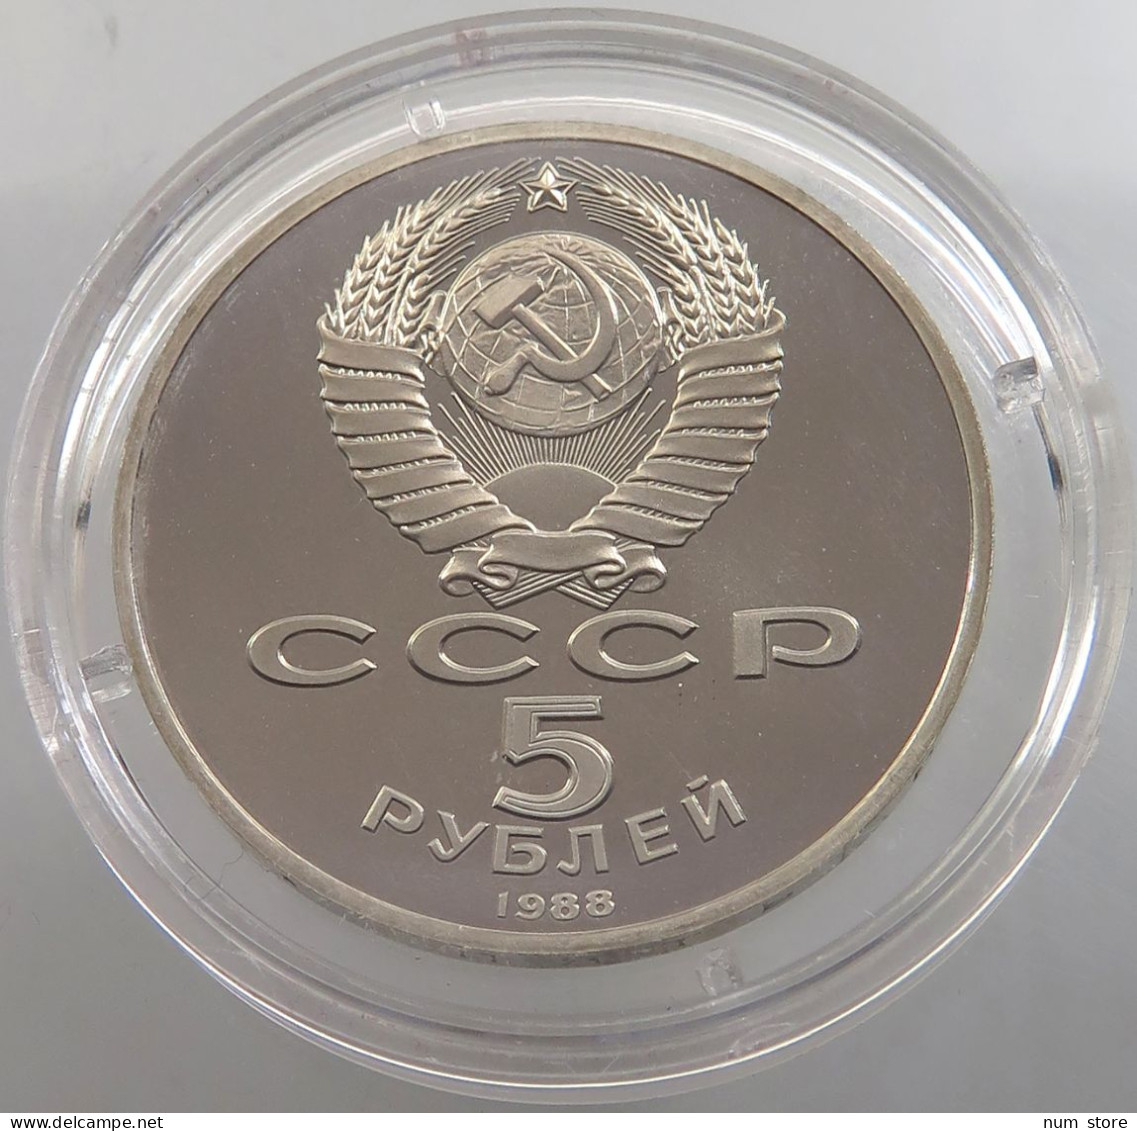 RUSSIA USSR 5 ROUBLES 1988 PROOF #sm14 0355 - Rusland